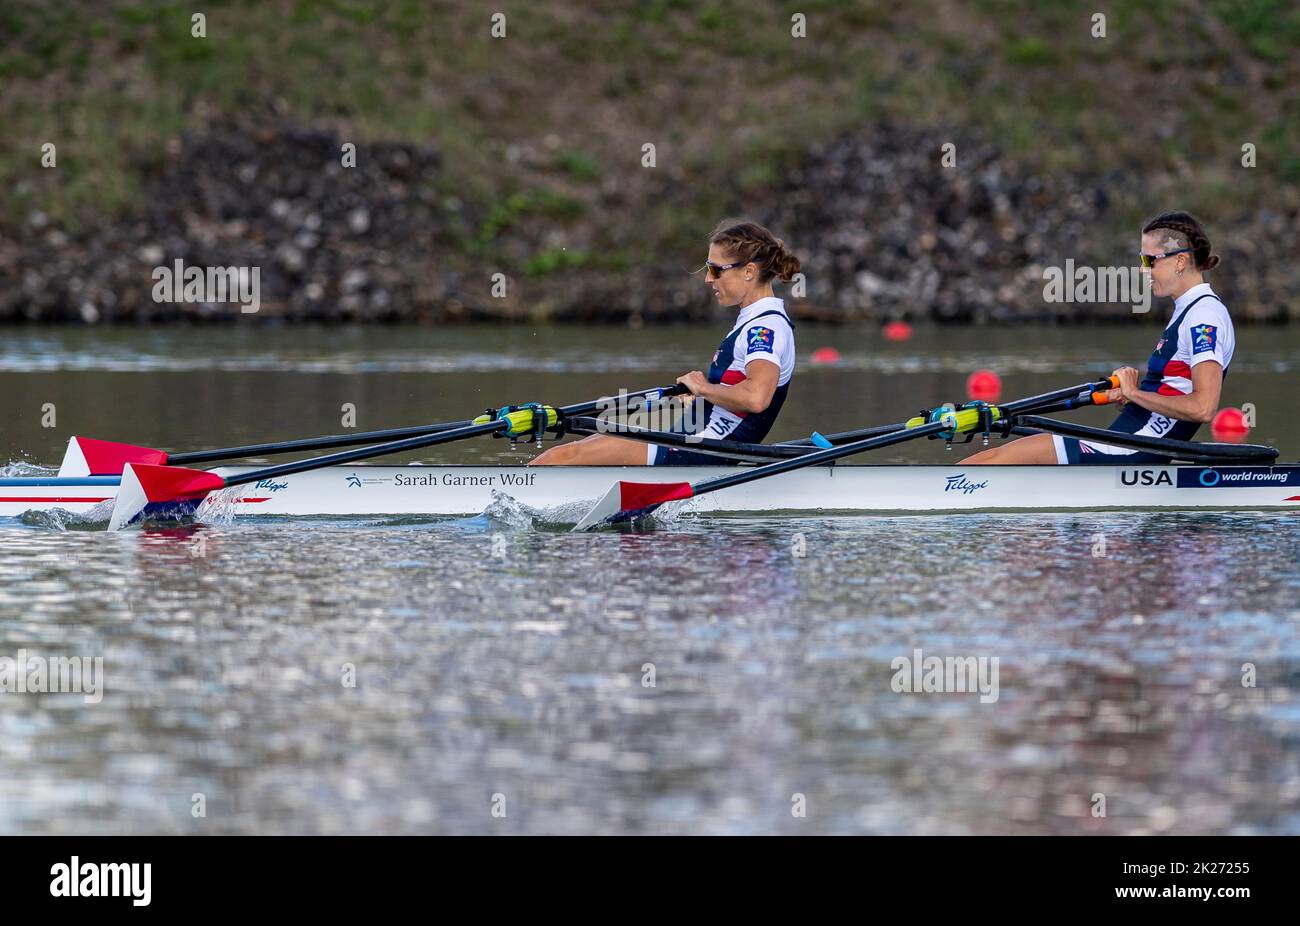 Racice, Czech Republic. 22nd Sep, 2022. Mary Reckford, Michelle Sechser of USA competing during Day 5 of the 2022 World Rowing Championships, Lightweight Women's double sculls semifinal at the Labe Arena Racice on September 22, 2022 in Racice, Czech Republic. Credit: Ondrej Hajek/CTK Photo/Alamy Live News Stock Photo